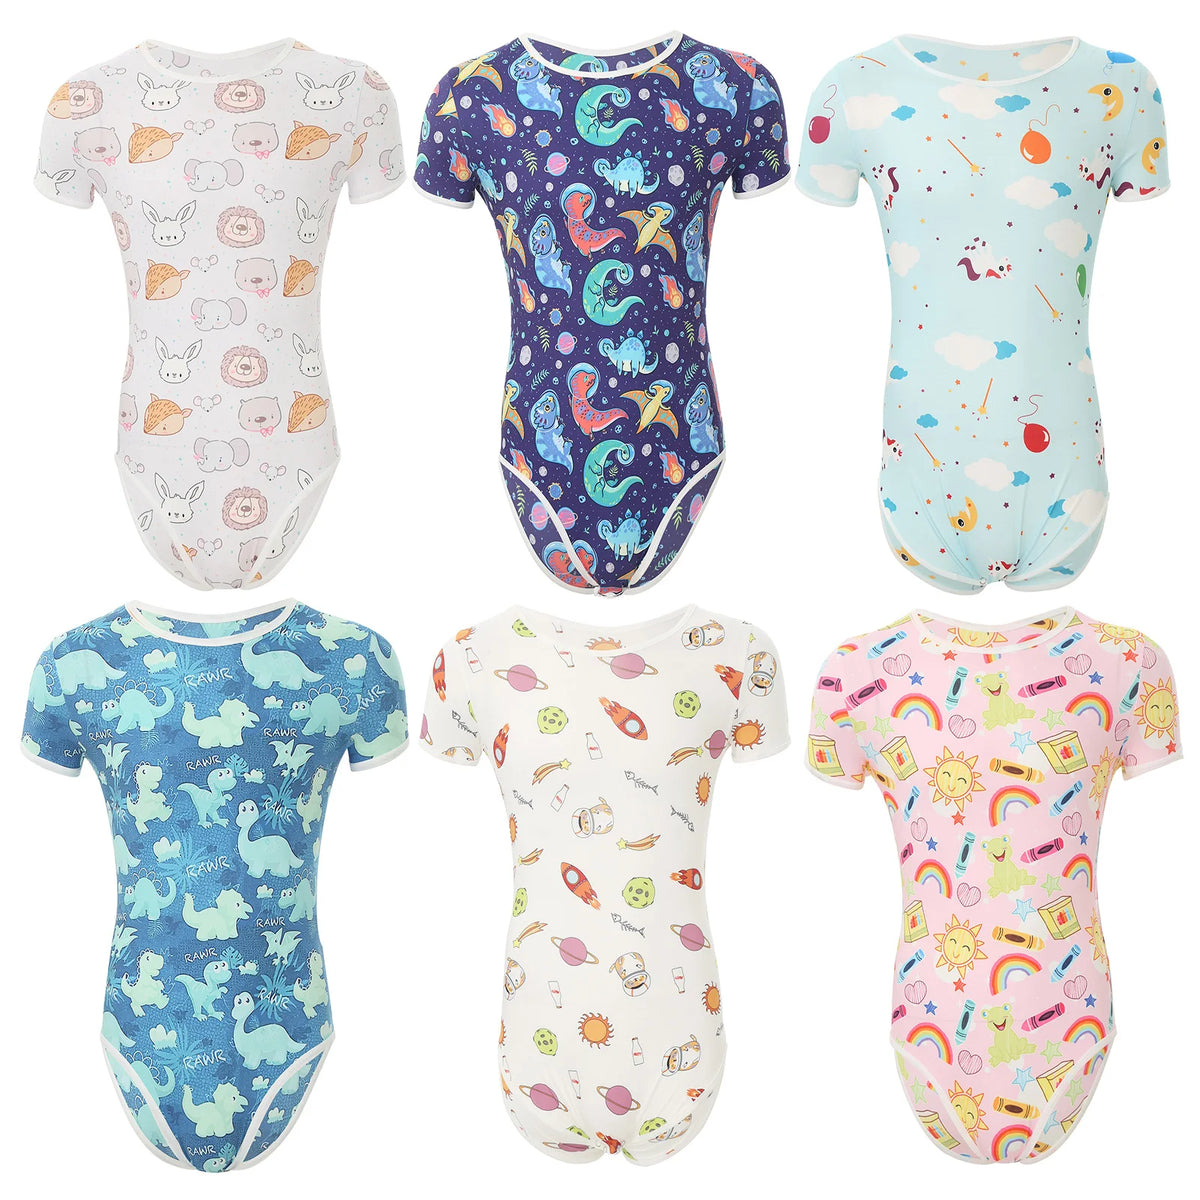 FREESHOW Whimsical Onesies - Adult Baby Clothes - Twisted Jezebel